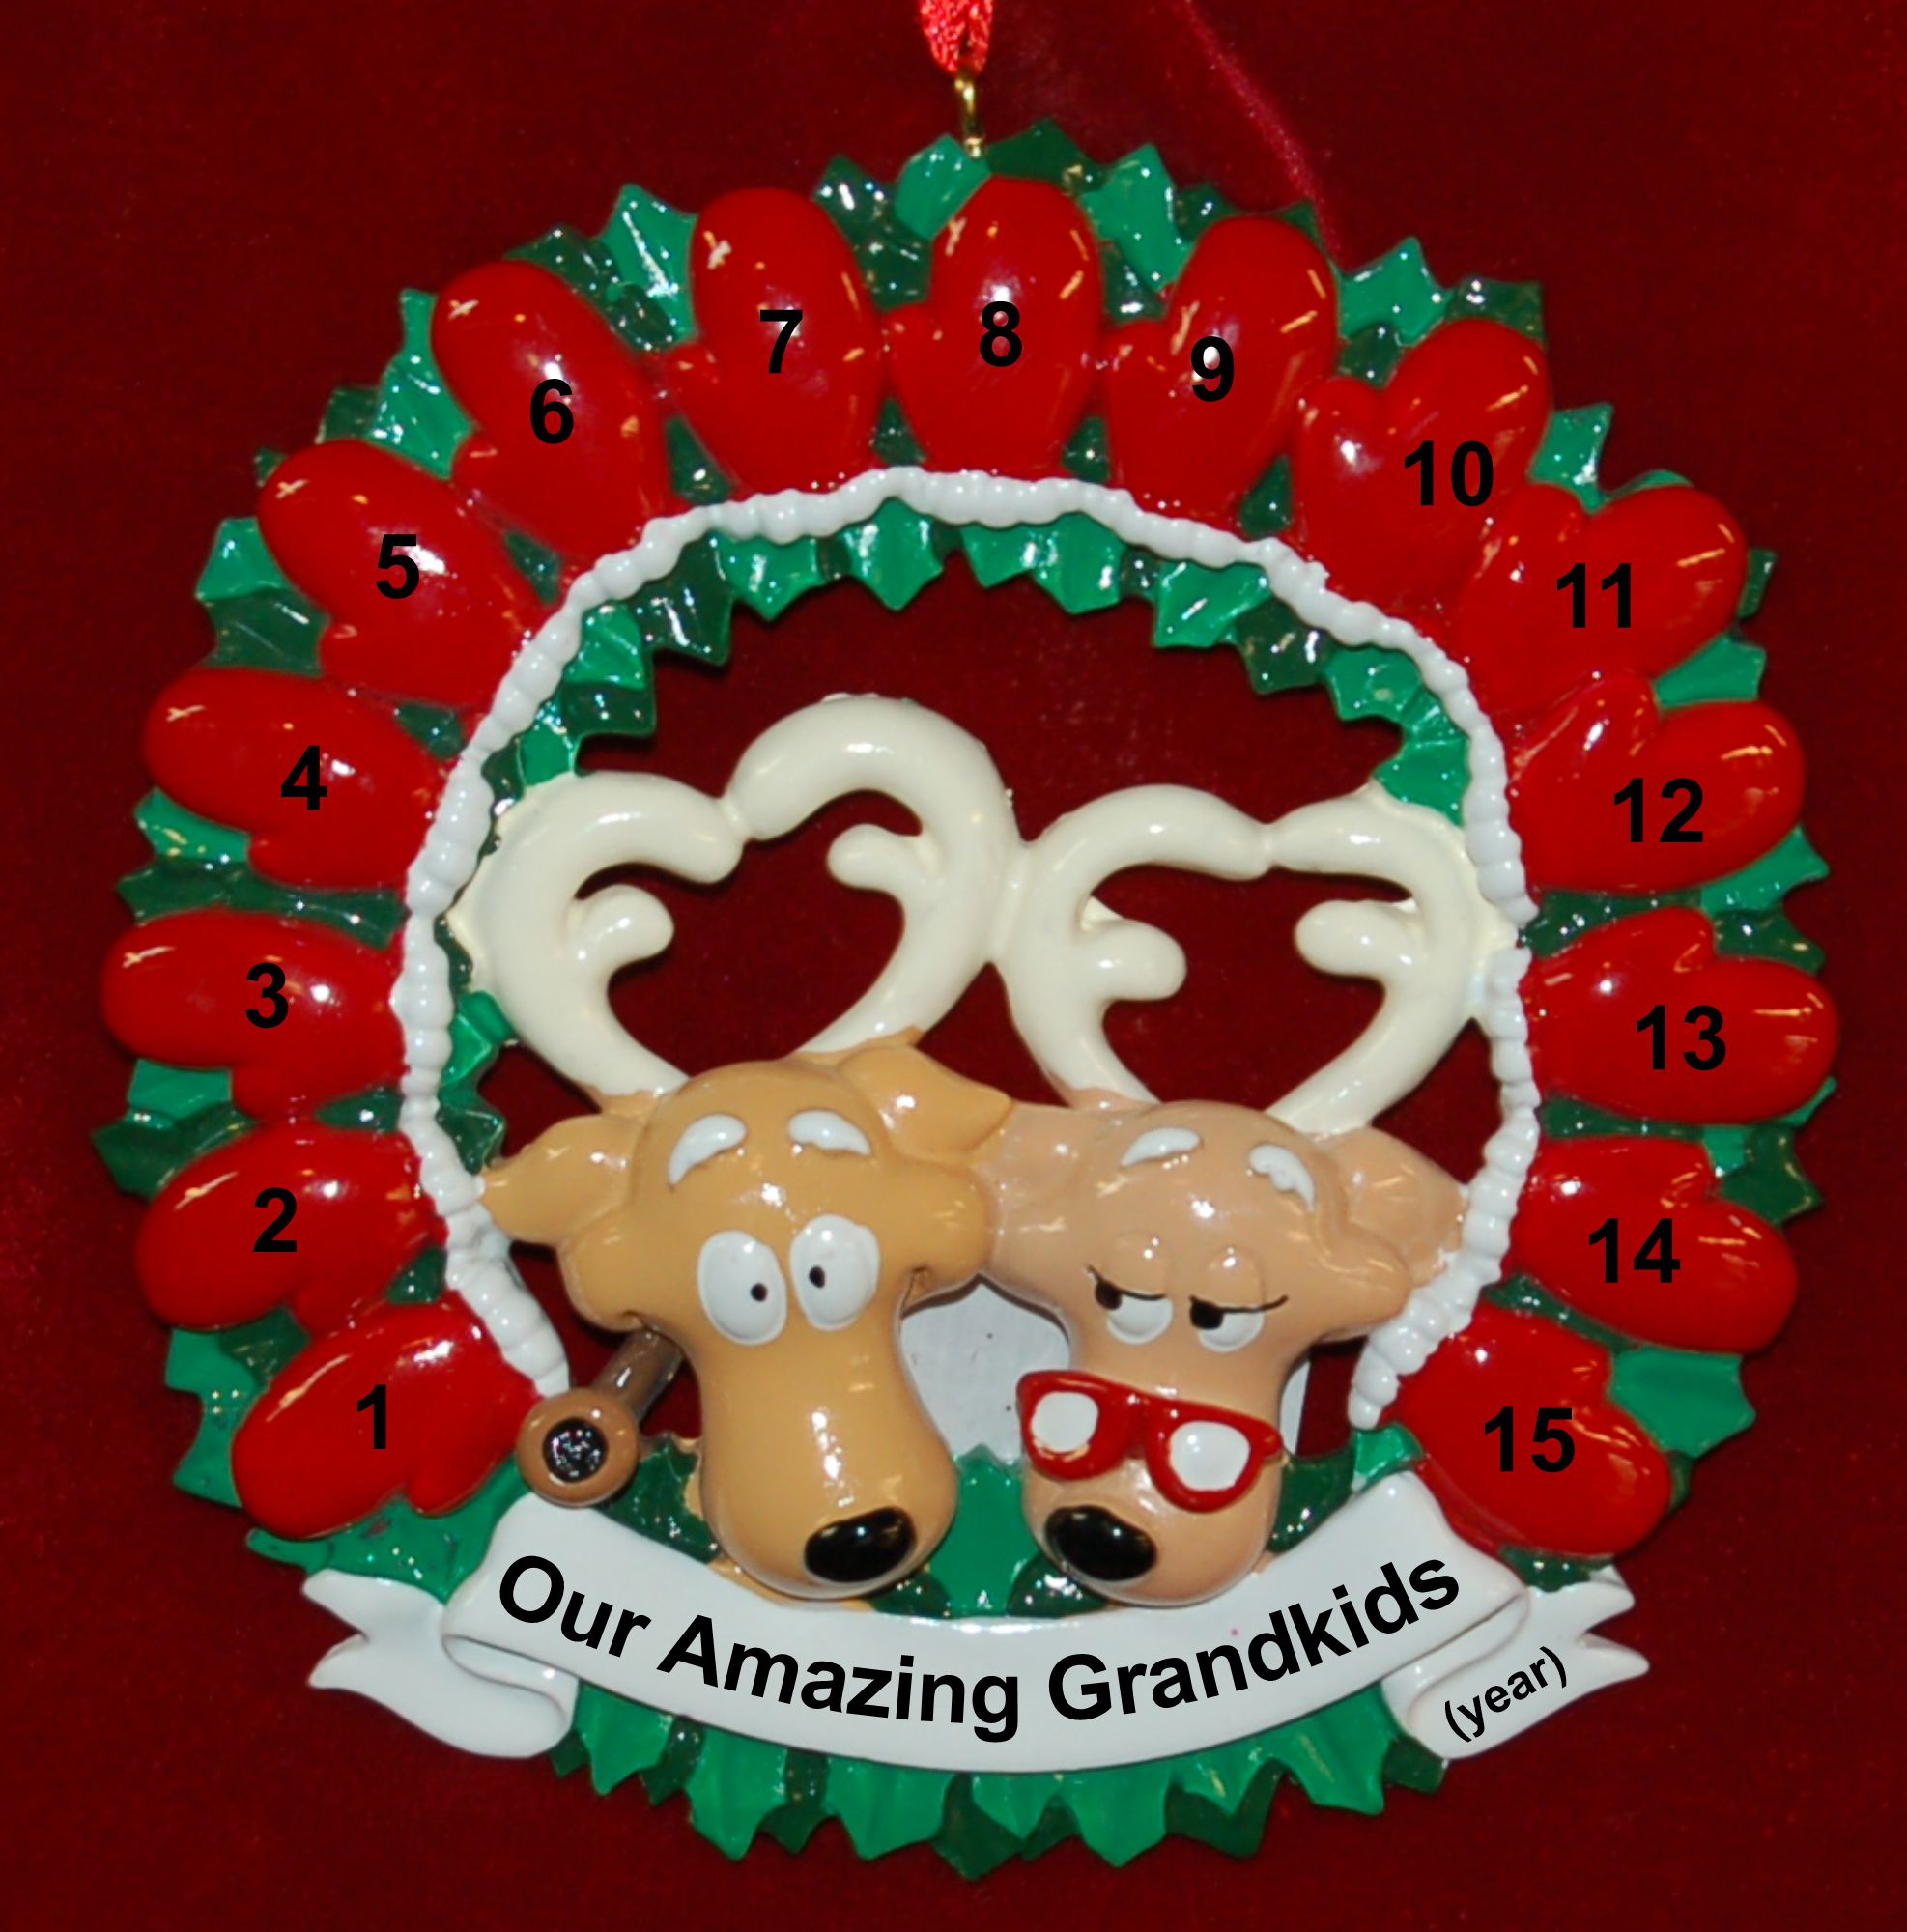 Grandparents Christmas Ornament up to 15 Grandkids Personalized FREE by Russell Rhodes